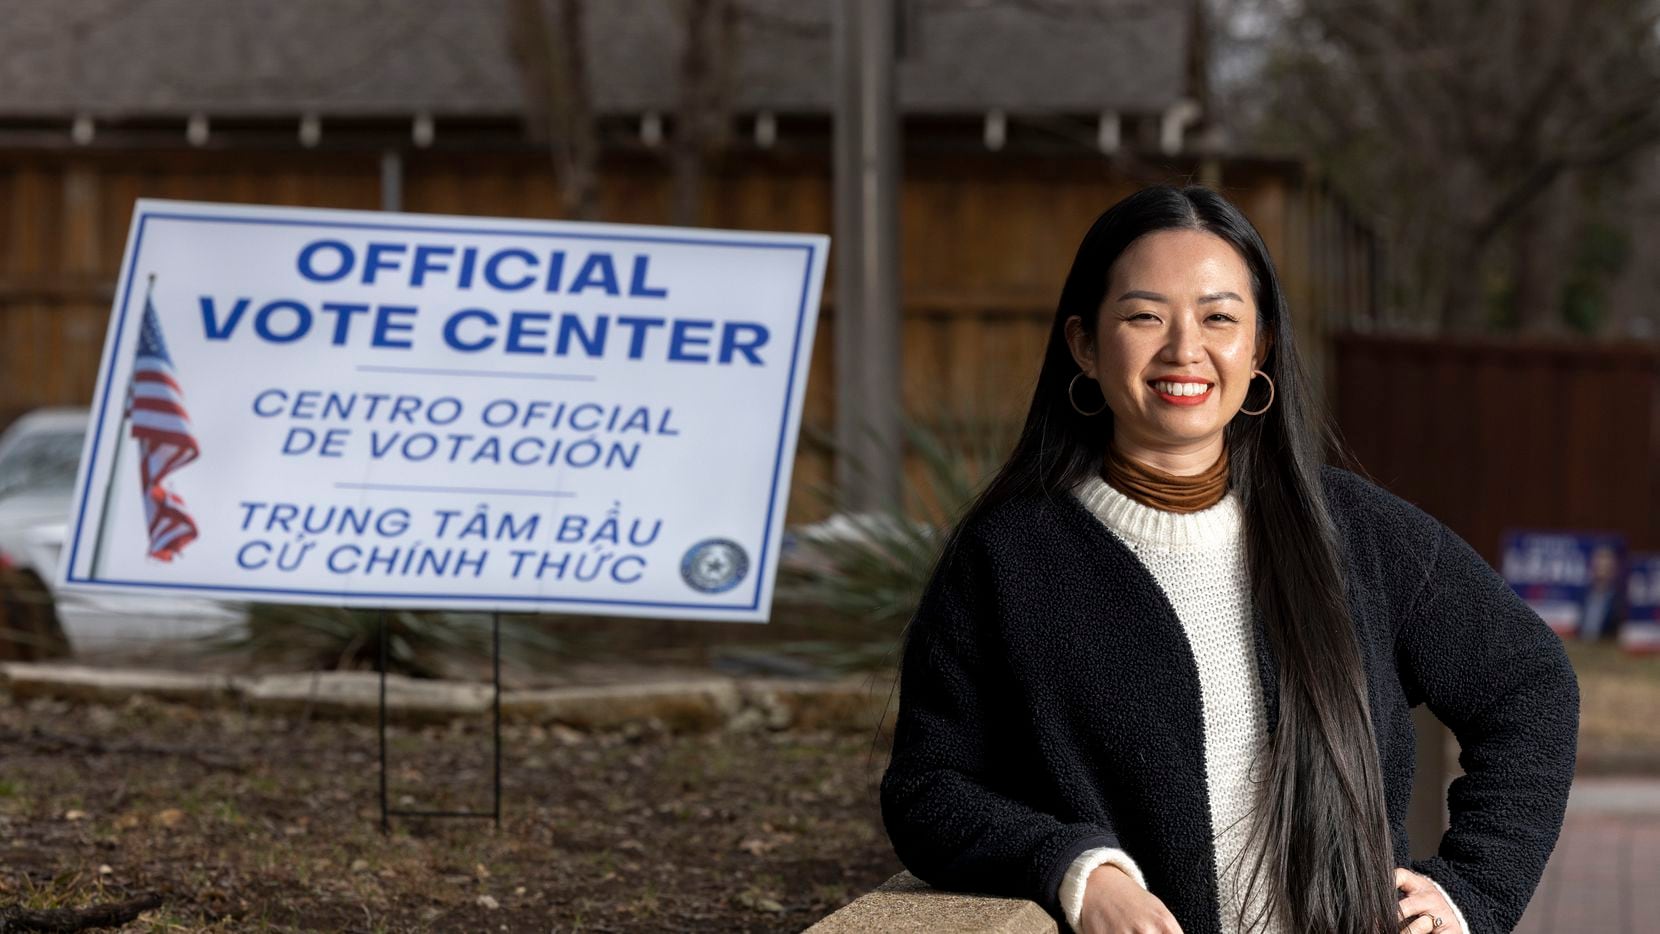 Nancy Tiên, Dallas native and Vietnamese-American, pictured outside the Lakewood Branch...